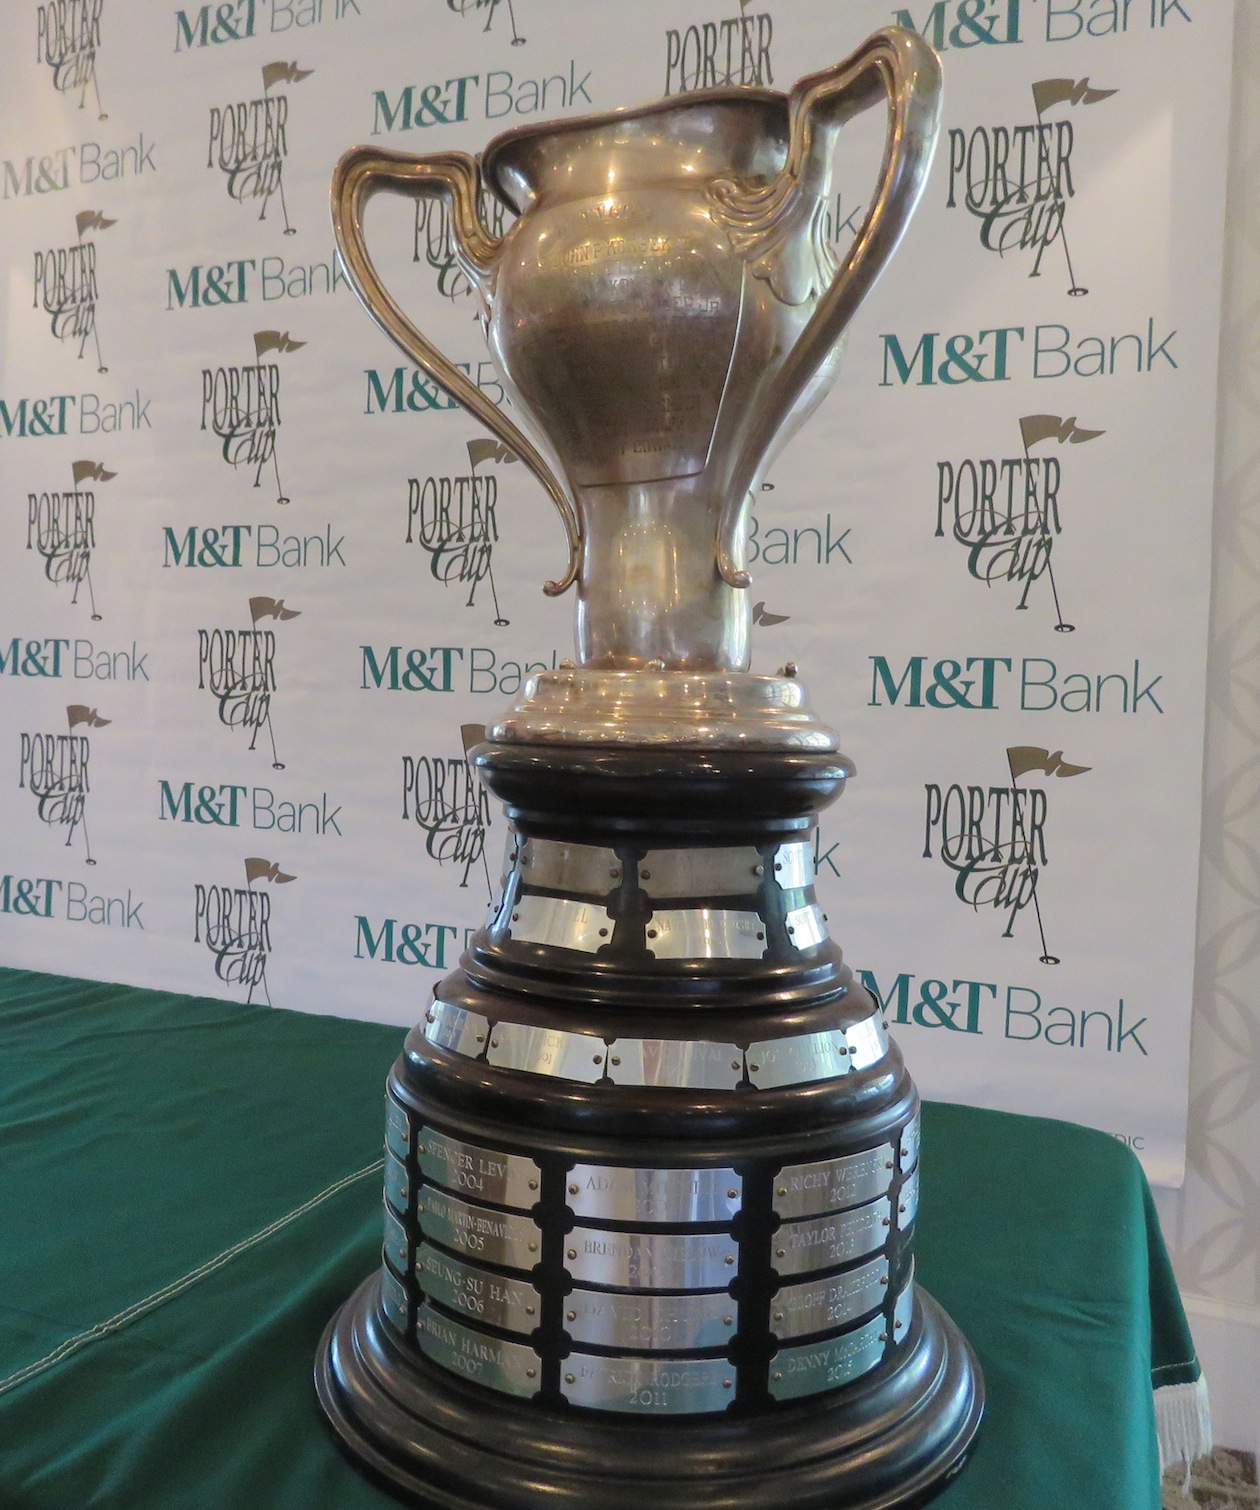 Porter Cup returning for year 61